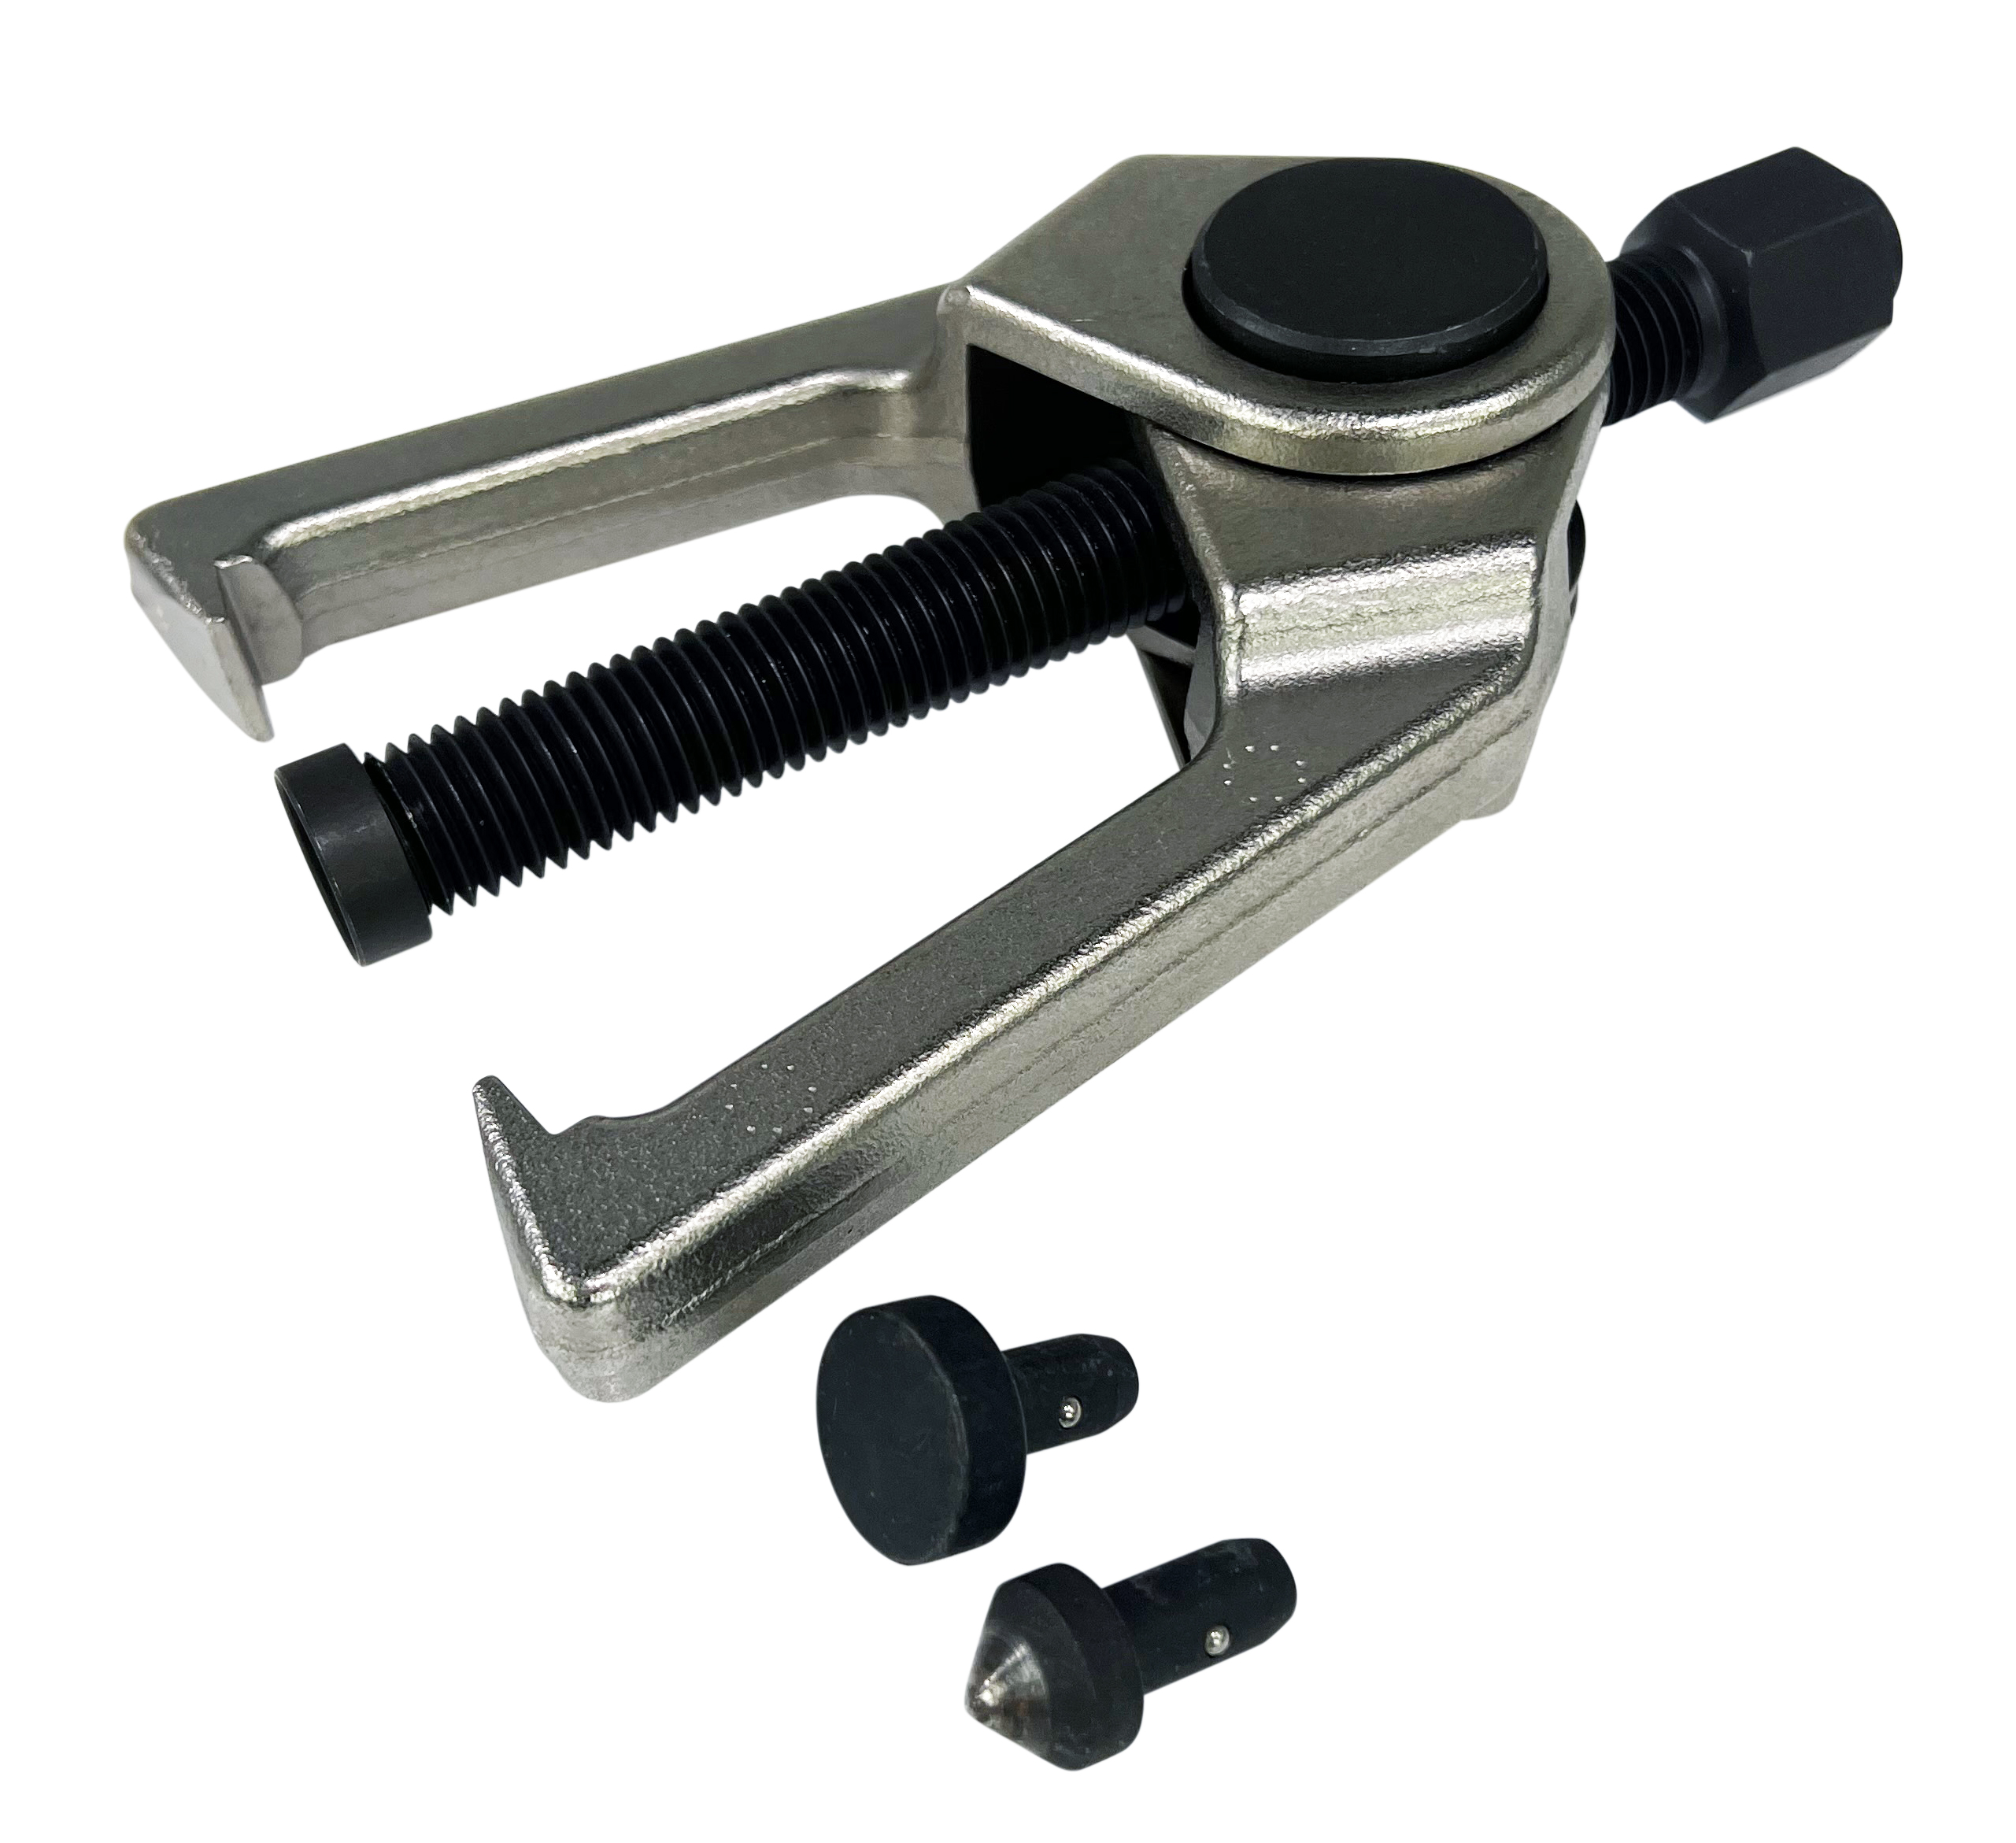 ACC-C10-7081 - B7-0800-0 - B708000 - BUGPACK - TIE ROD END PULLER TOOL -  18MM TO 25MM (HANDY COMPACT DESIGN) - ALL MODELS - SOLD EACH